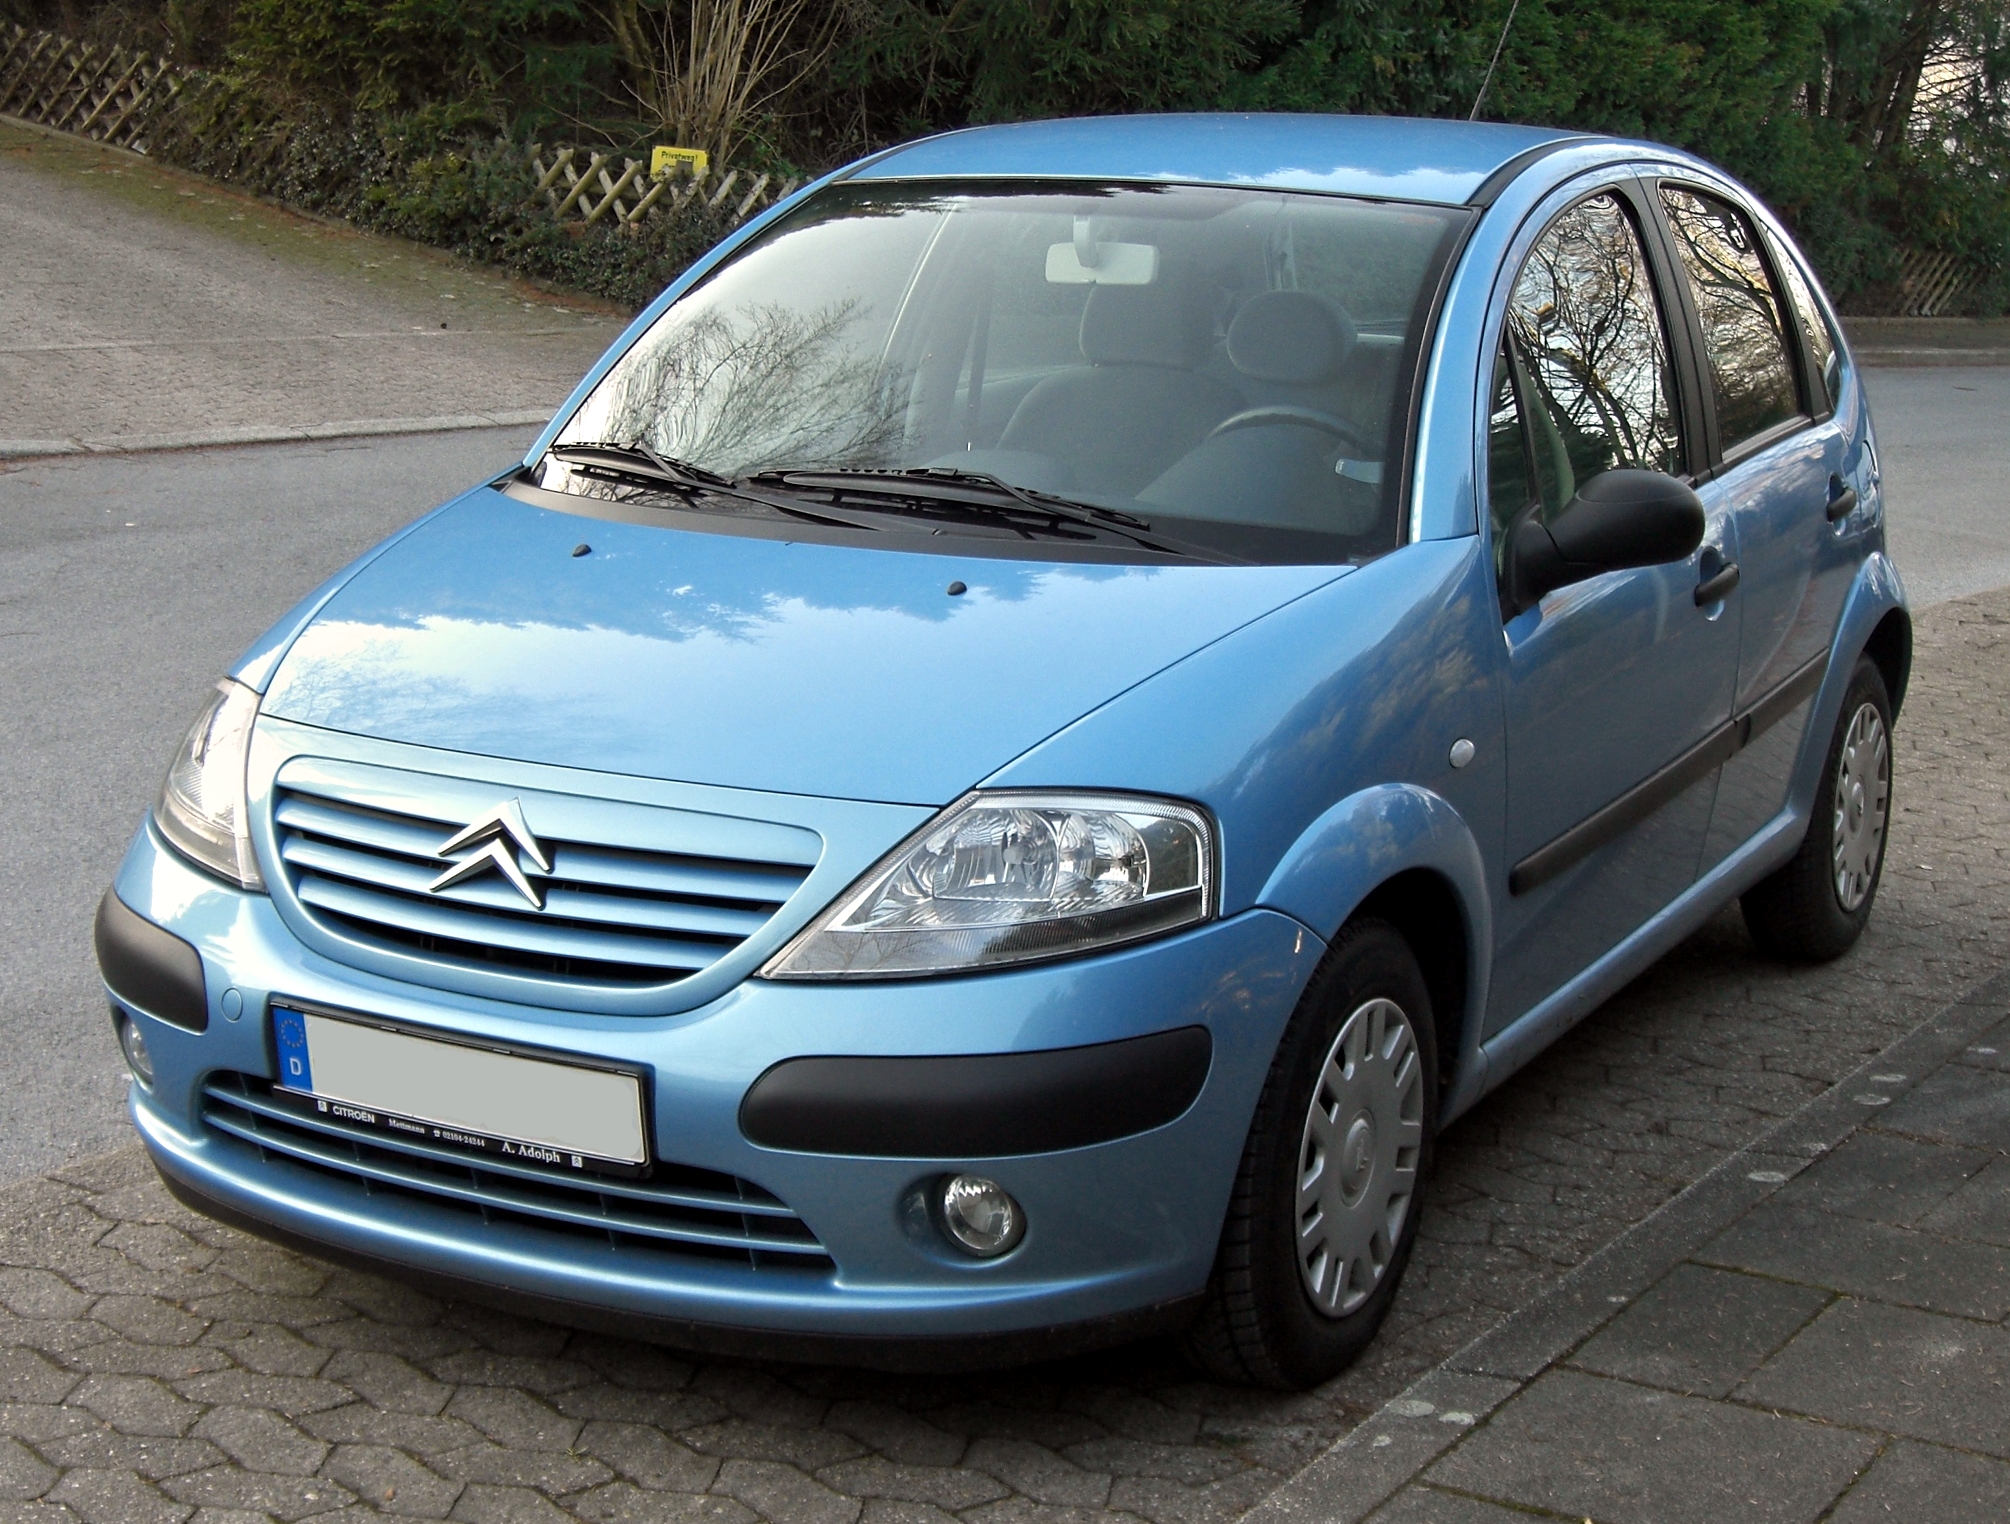 Citroen C3 I Restyling 2005 - 2009 Cabriolet :: Outstanding Cars